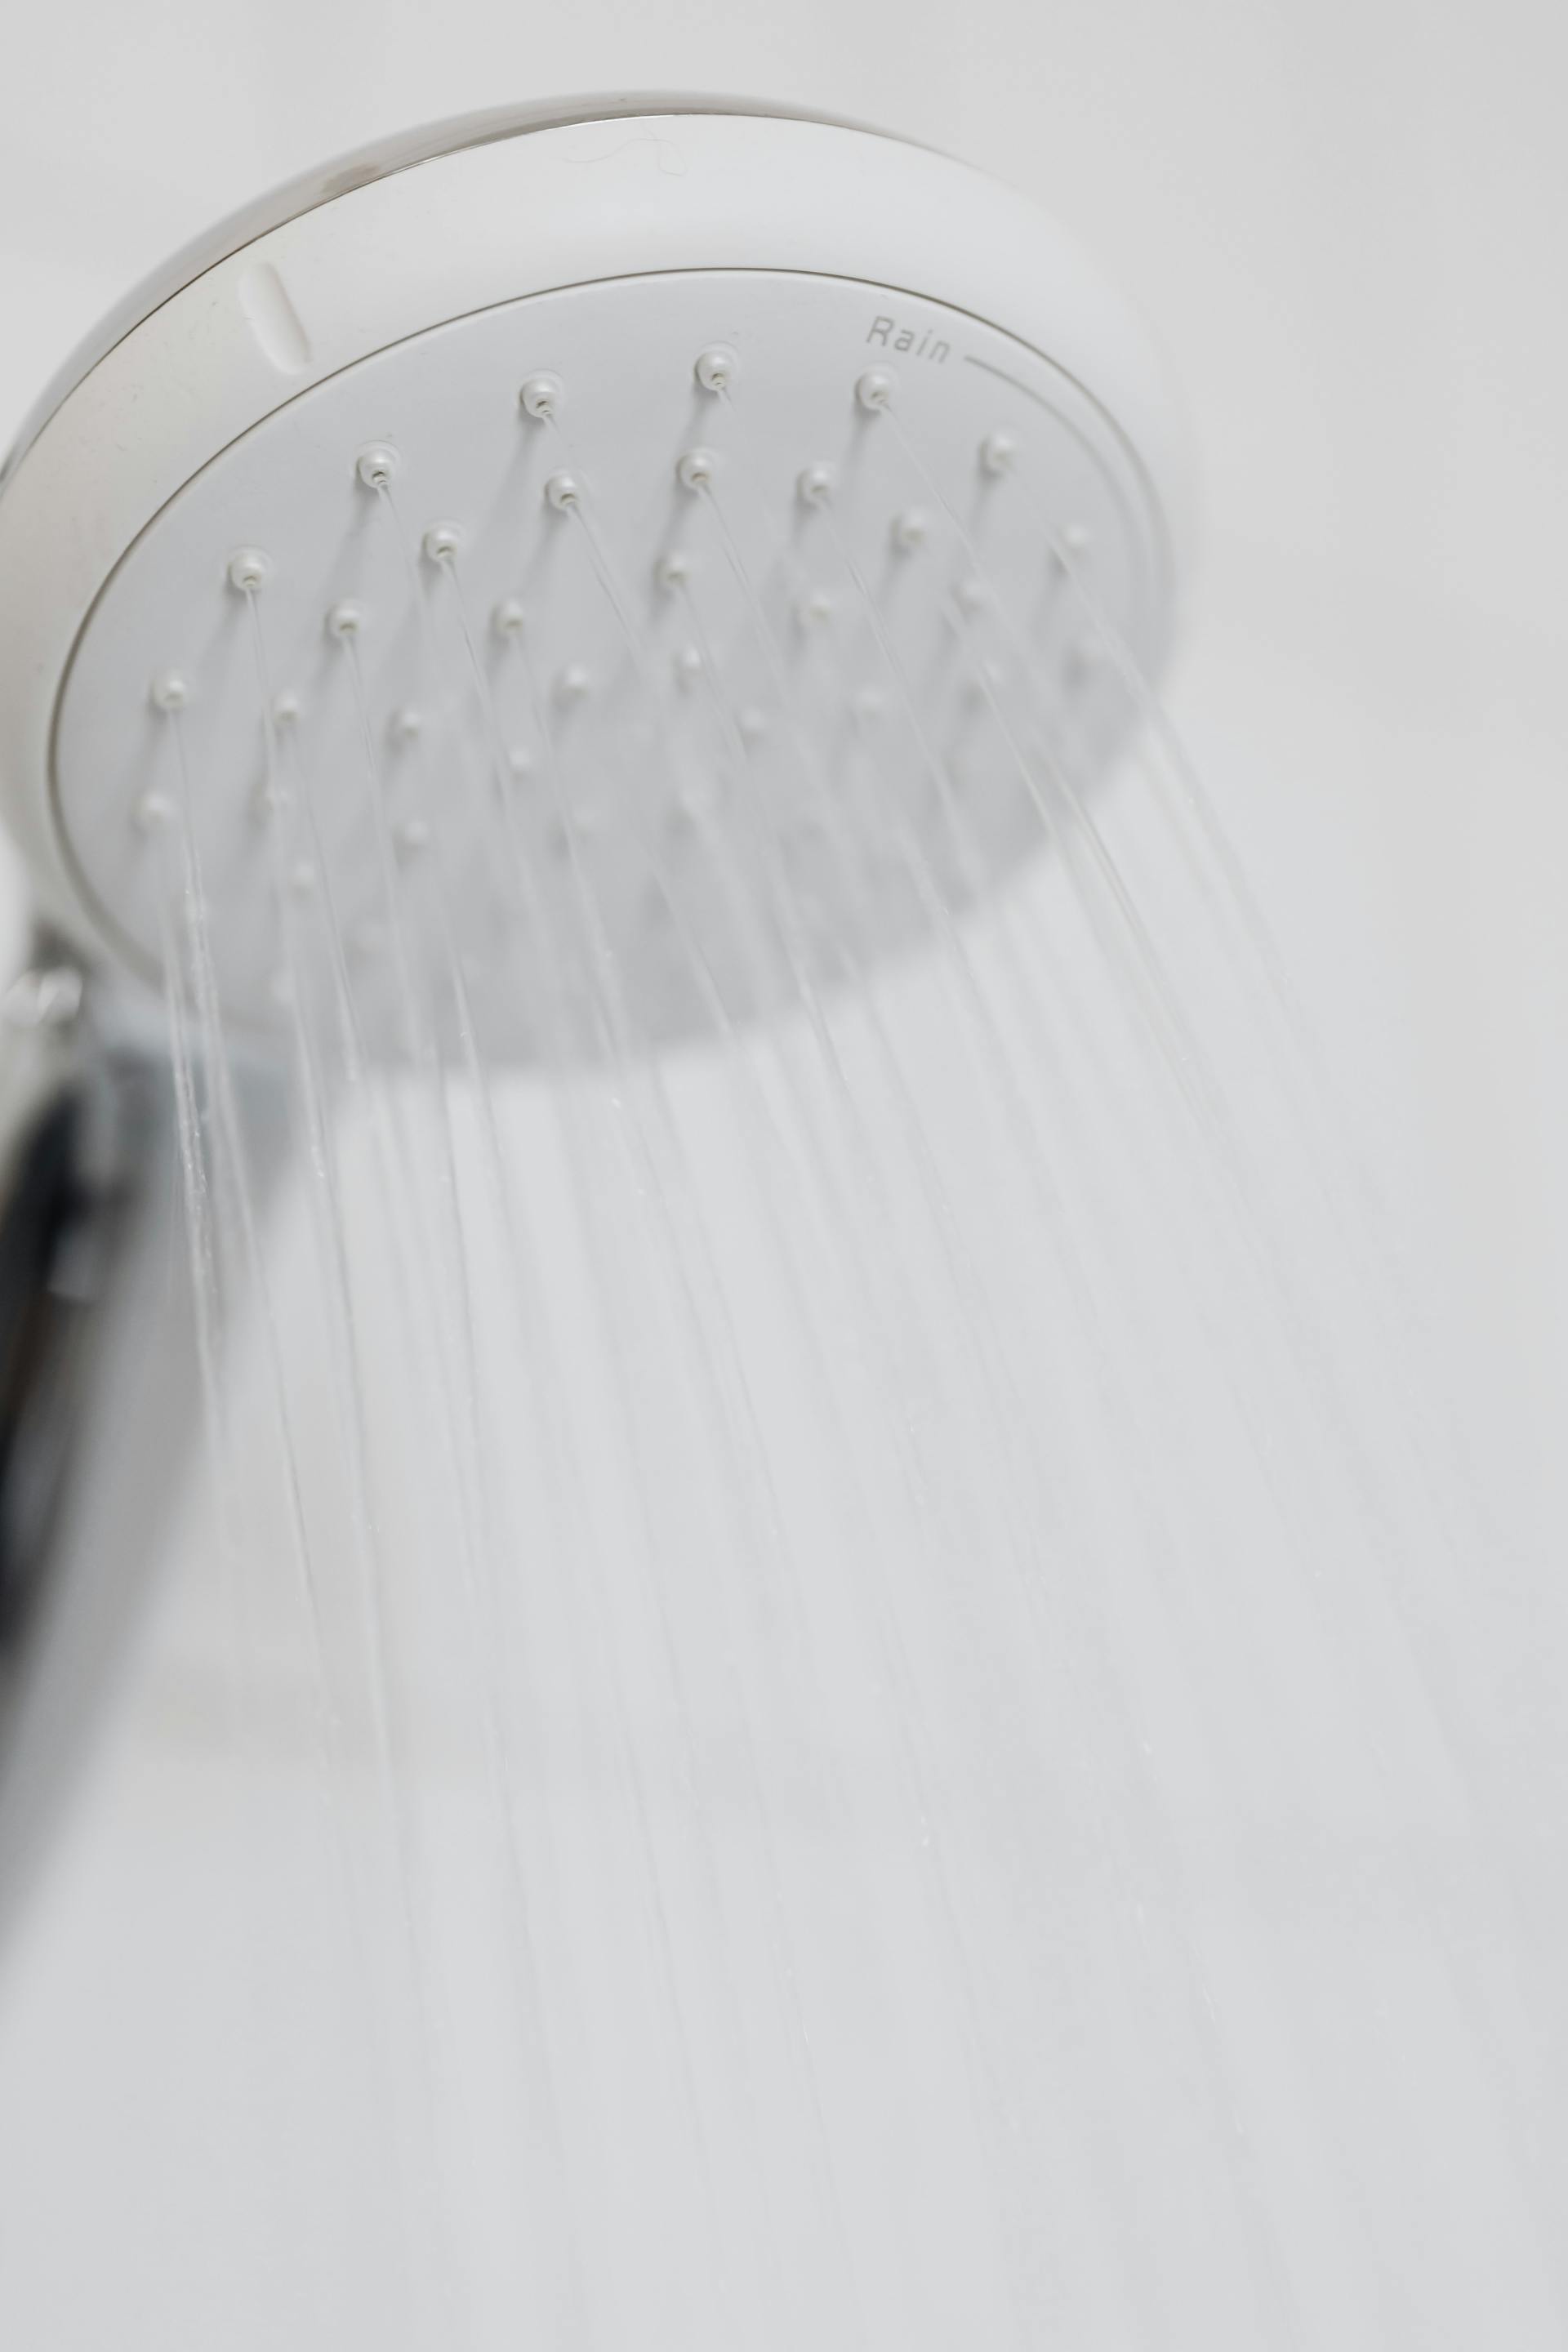 Close-up of a showerhead | Source: Pexels